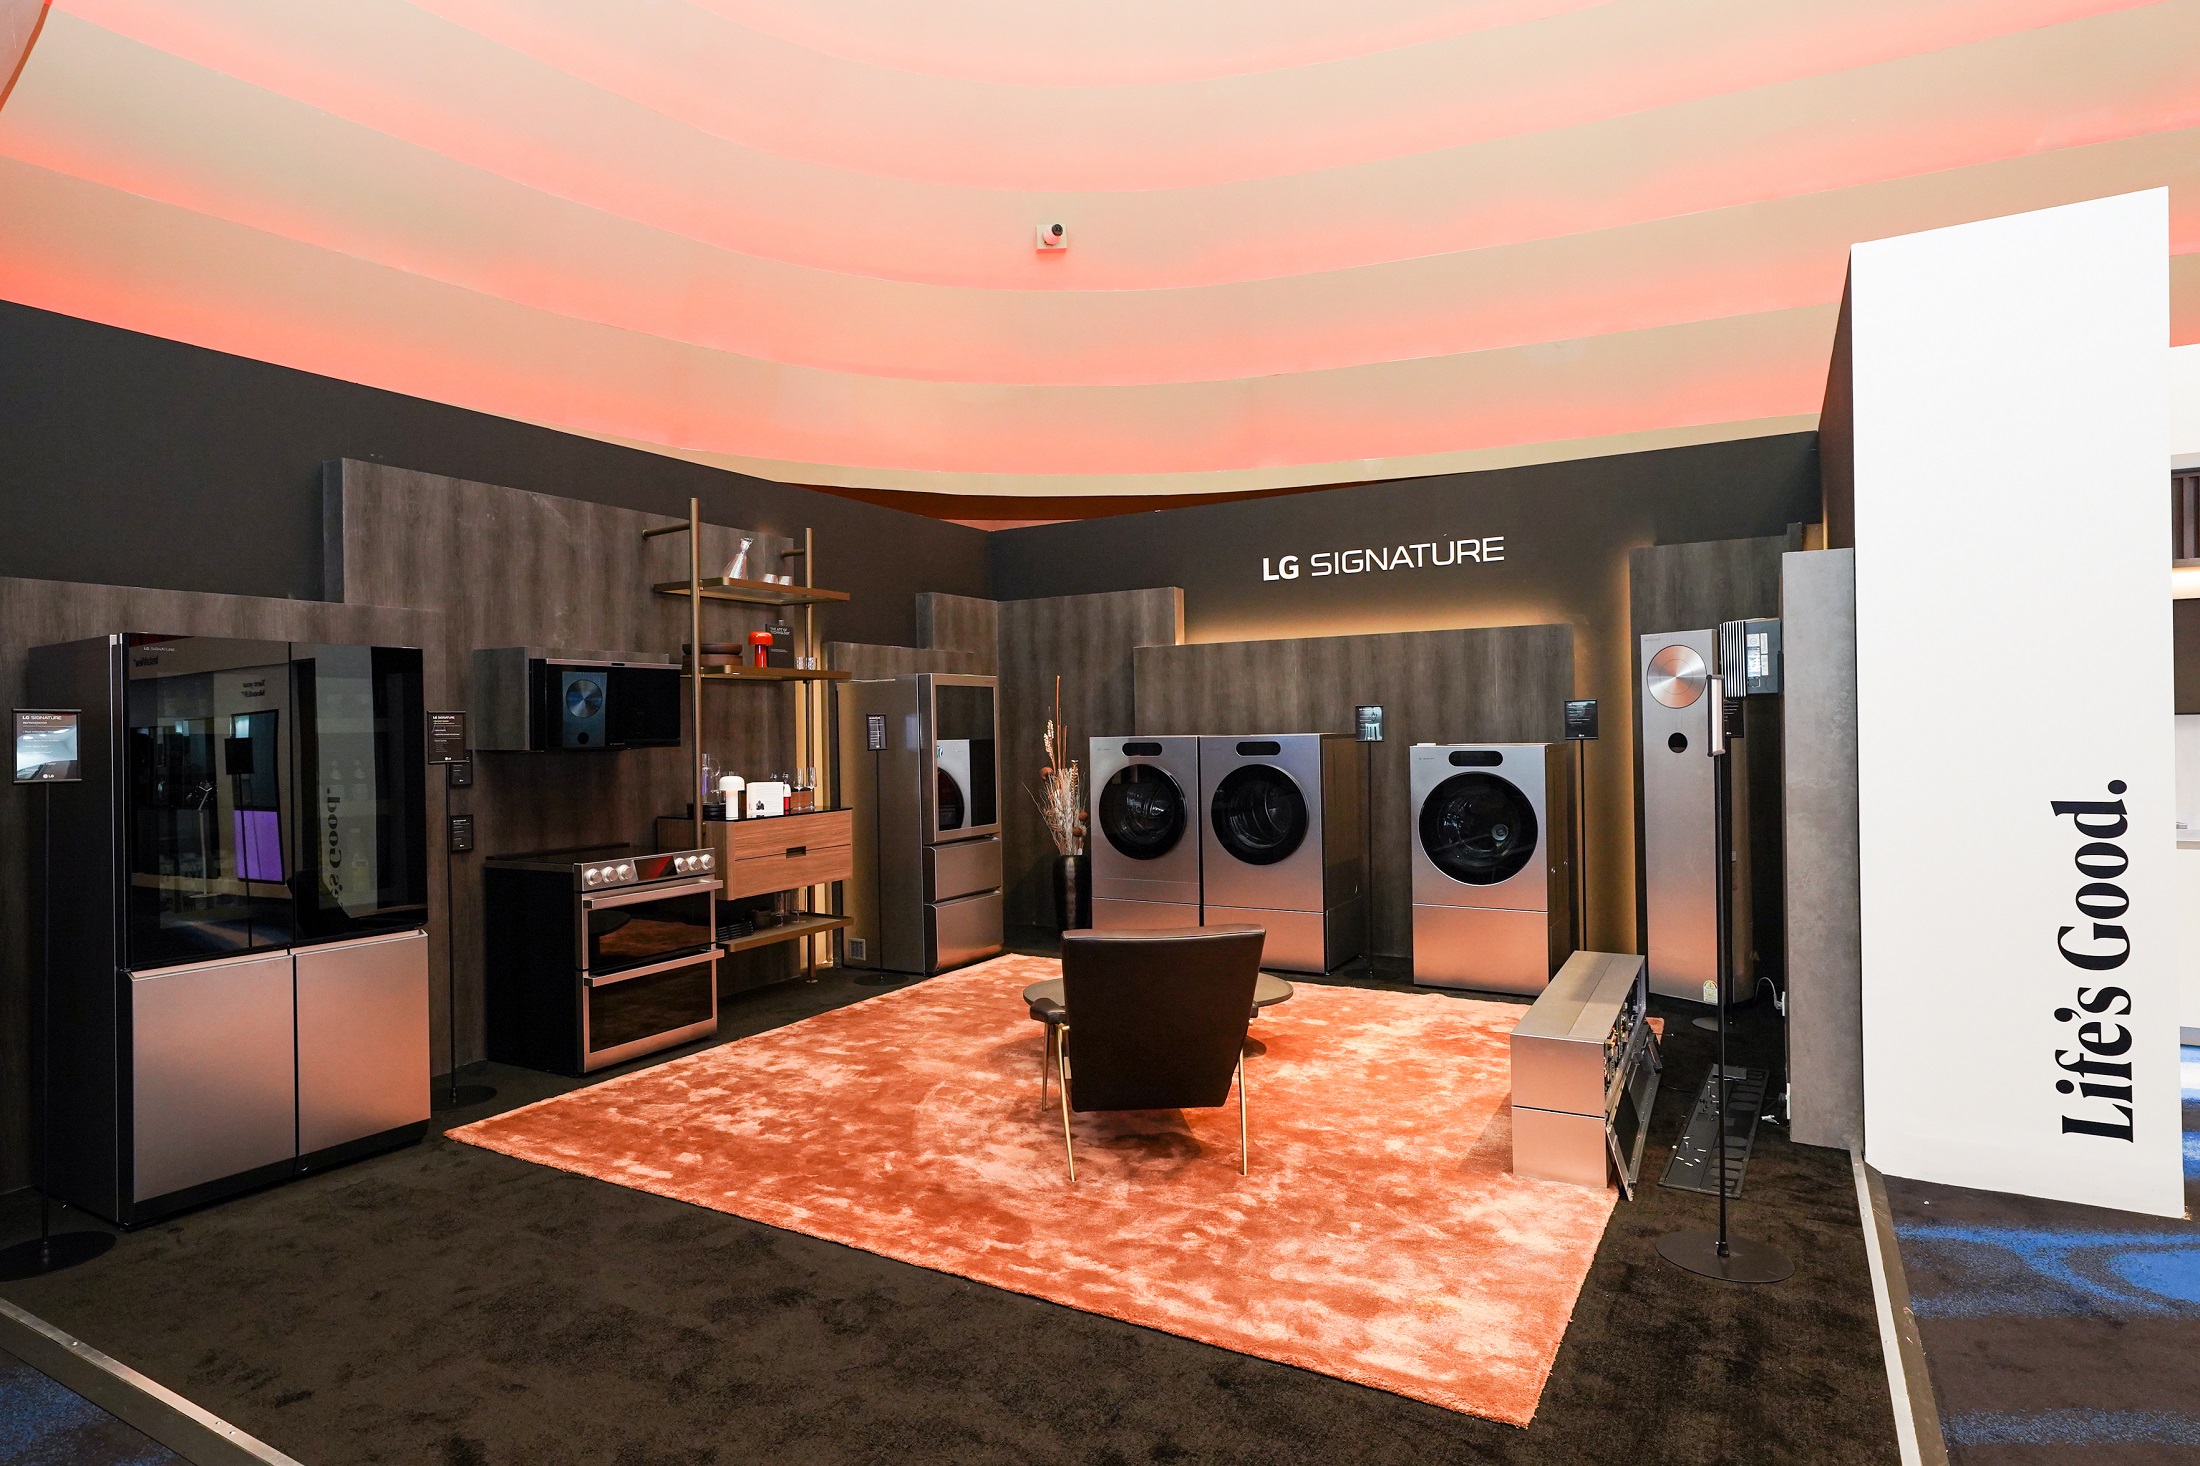 LG SIGNATURE appliances displayed at the renowned Middle East and Africa (MEA) tech event, LG Showcase 2023